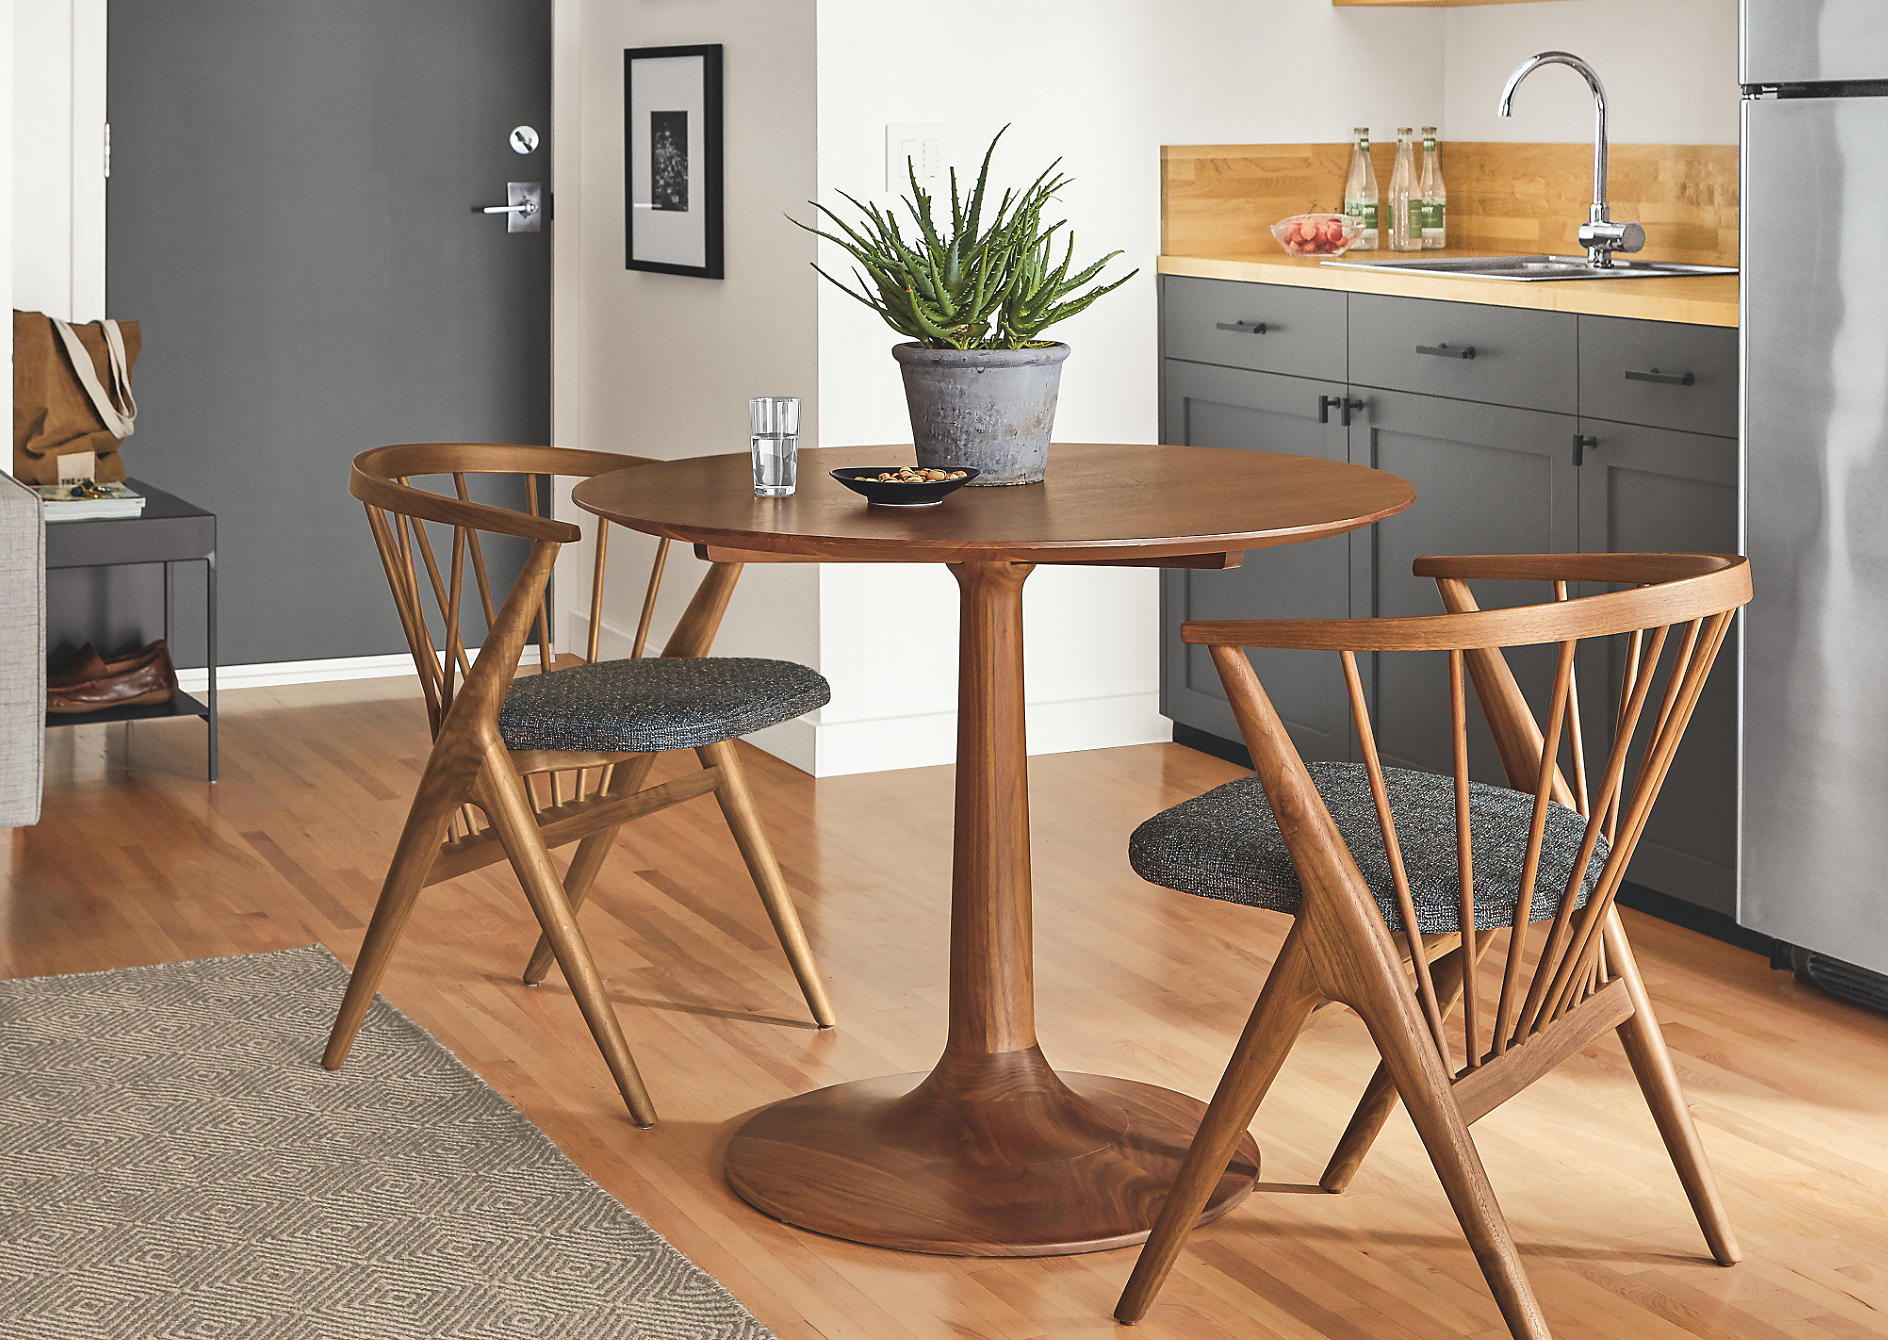 Dining Tables & Chairs for Small Spaces - Ideas & Advice - Room & Board